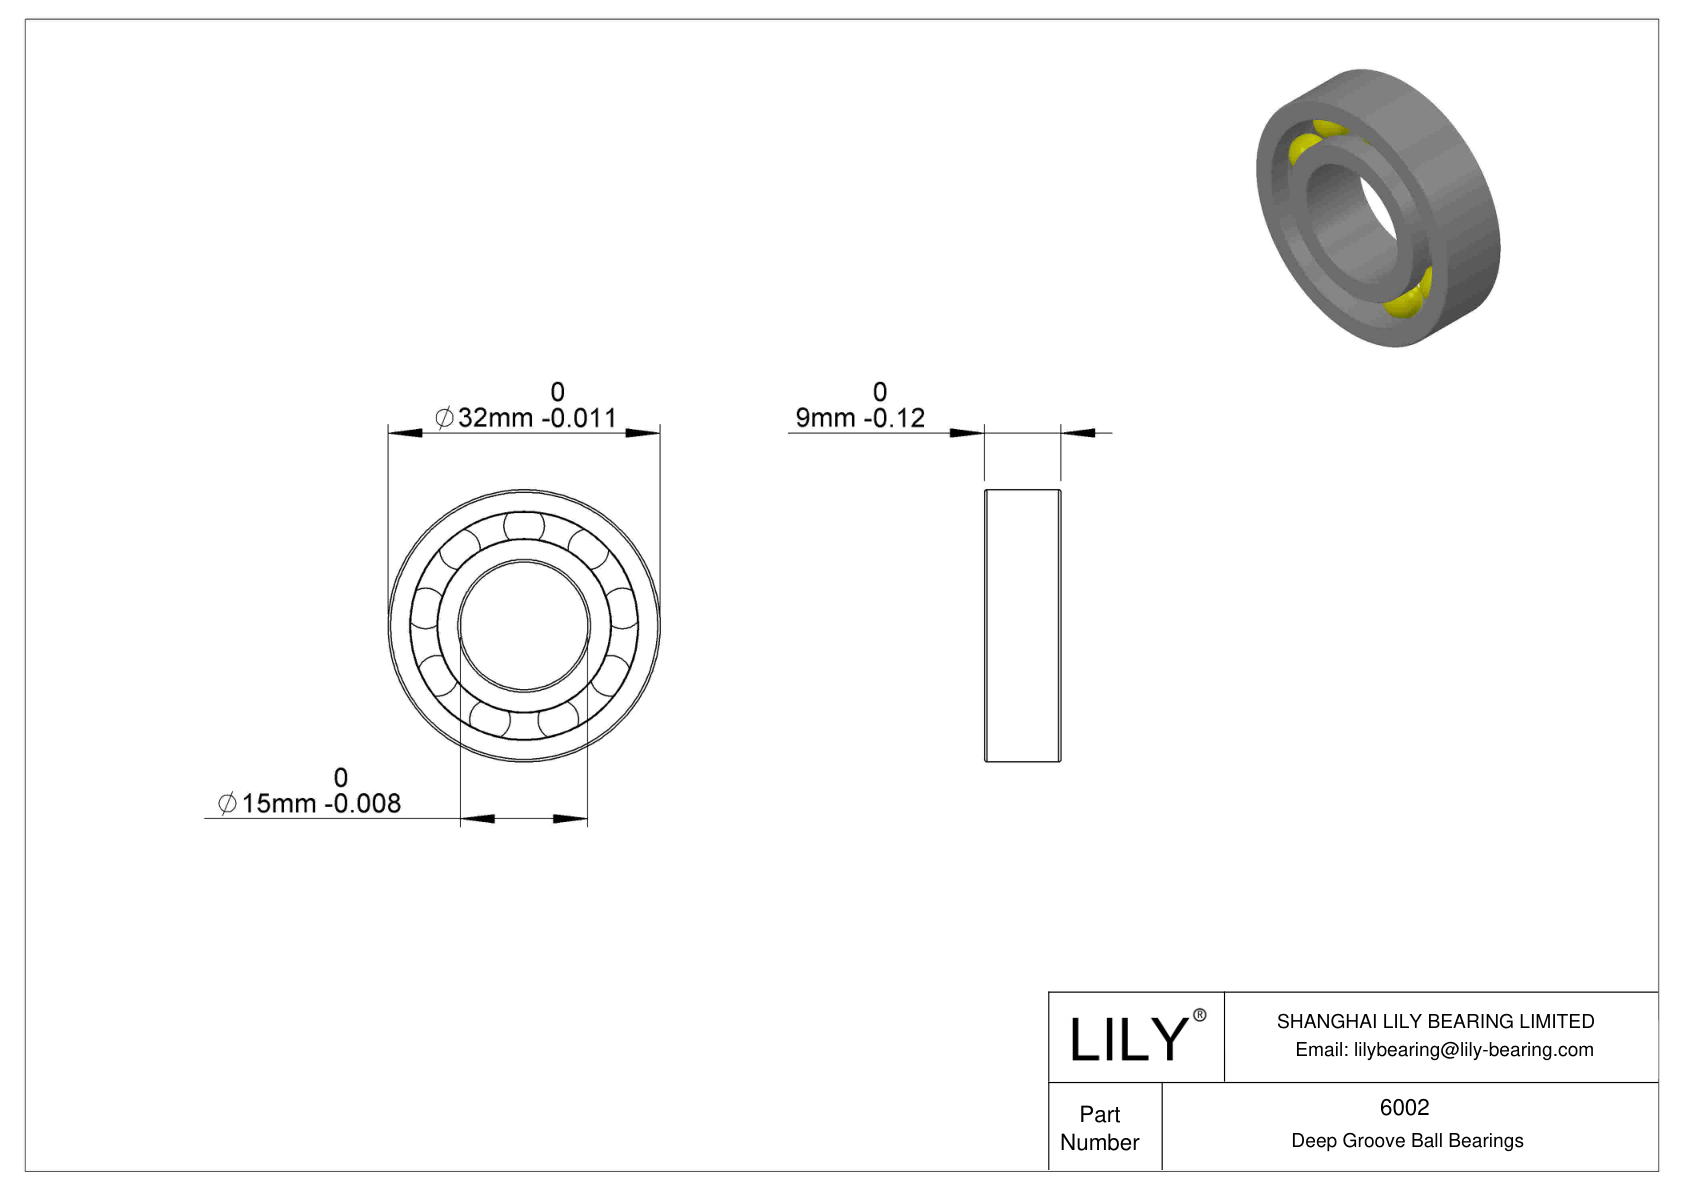 LILY-BS600245-15 POM Coated Bearing cad drawing